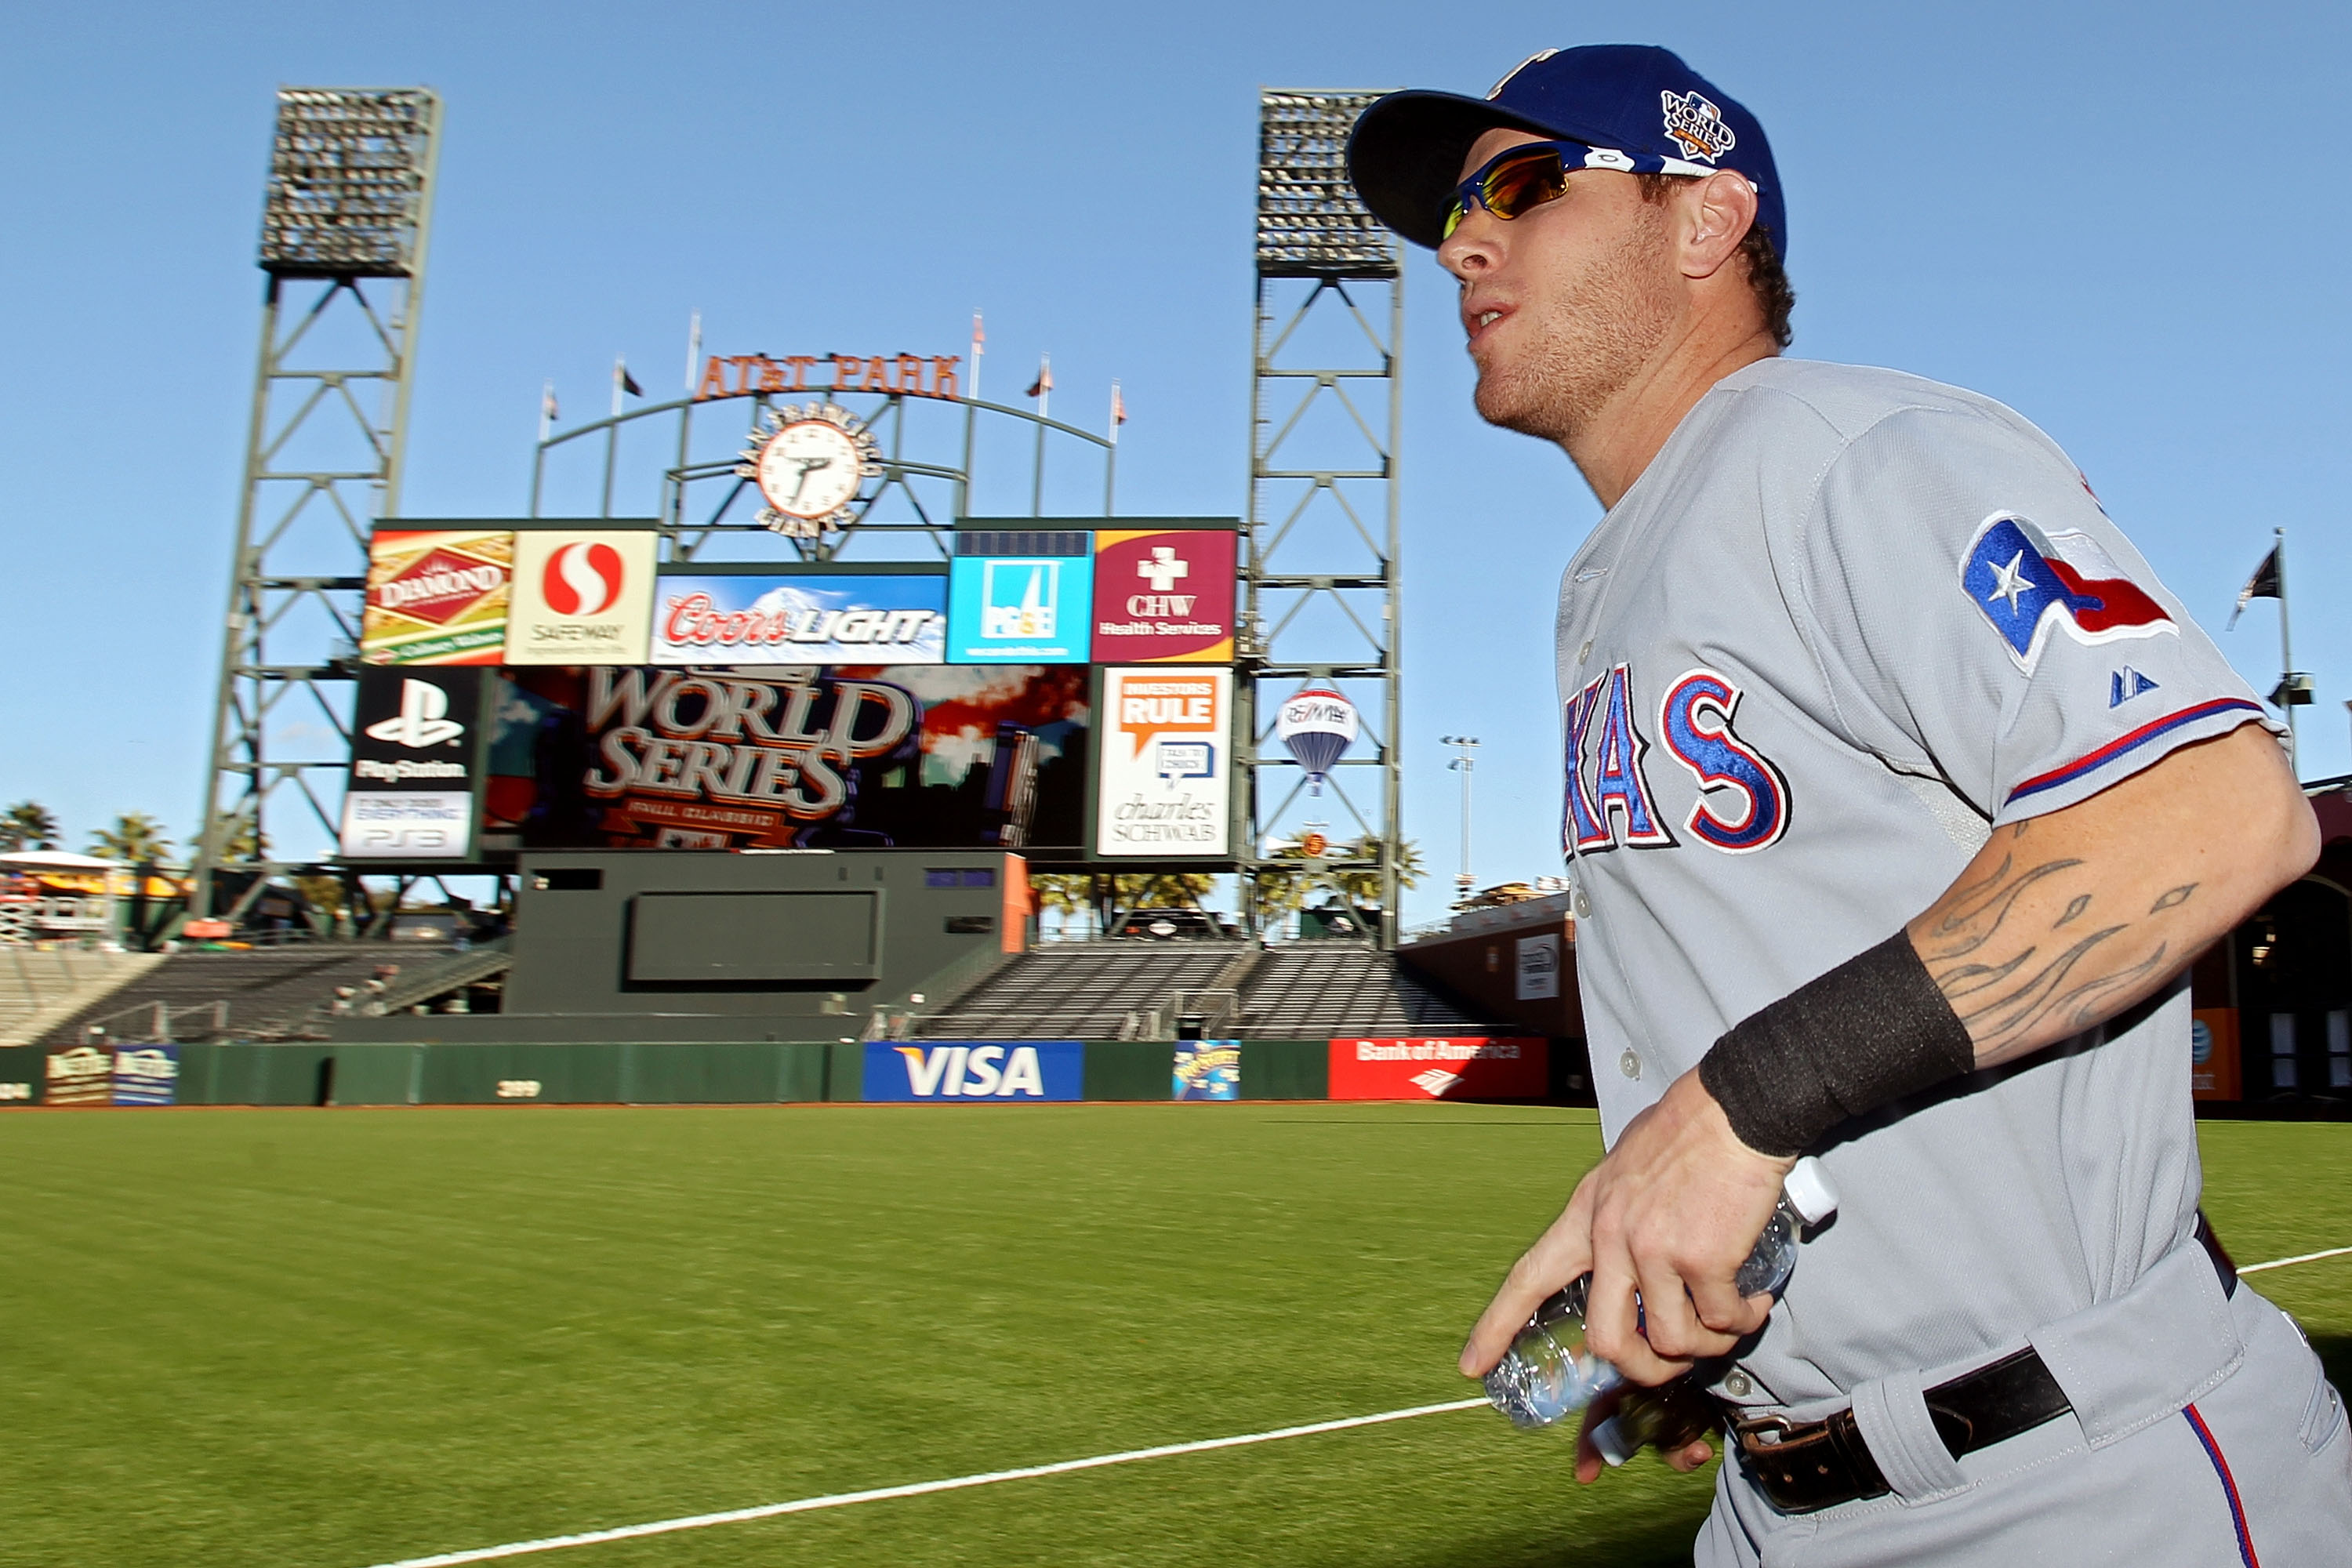 SAN FRANCISCO - OCTOBER 26:  Josh Hamilton #32 of the Texas Rangers walks on the field prior to a workout session at AT&T Park on October 26, 2010 in San Francisco, California. The Texas Rangers will face off against the San Francisco Giants in Game One o